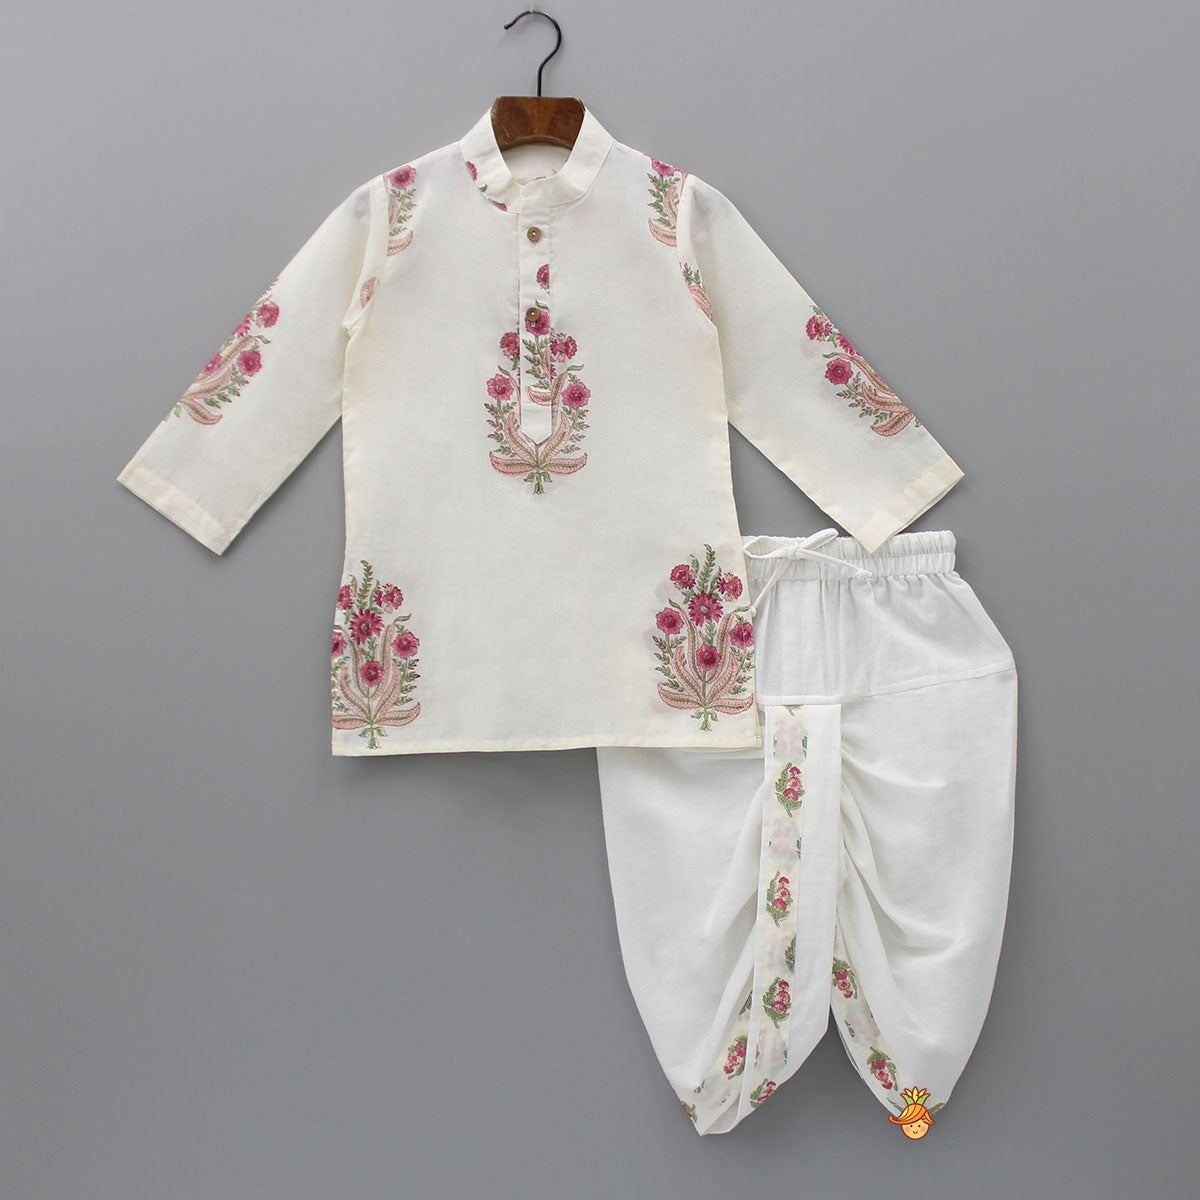 Floral Printed Kurta With Handworked Jacket And Dhoti.